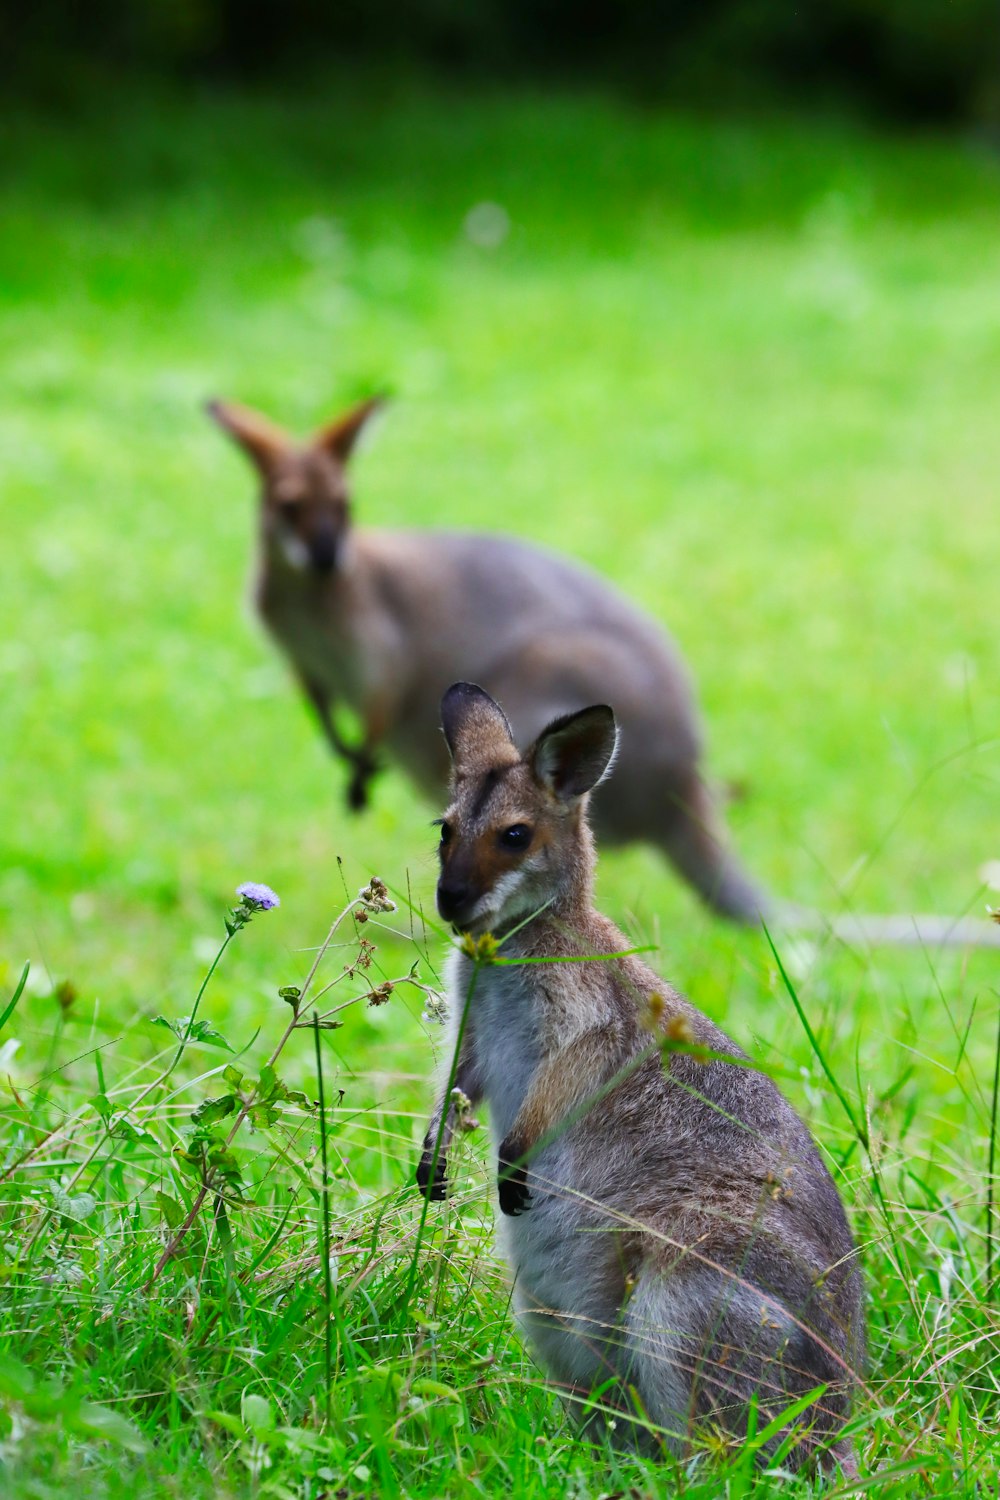 a couple of kangaroos are standing in the grass